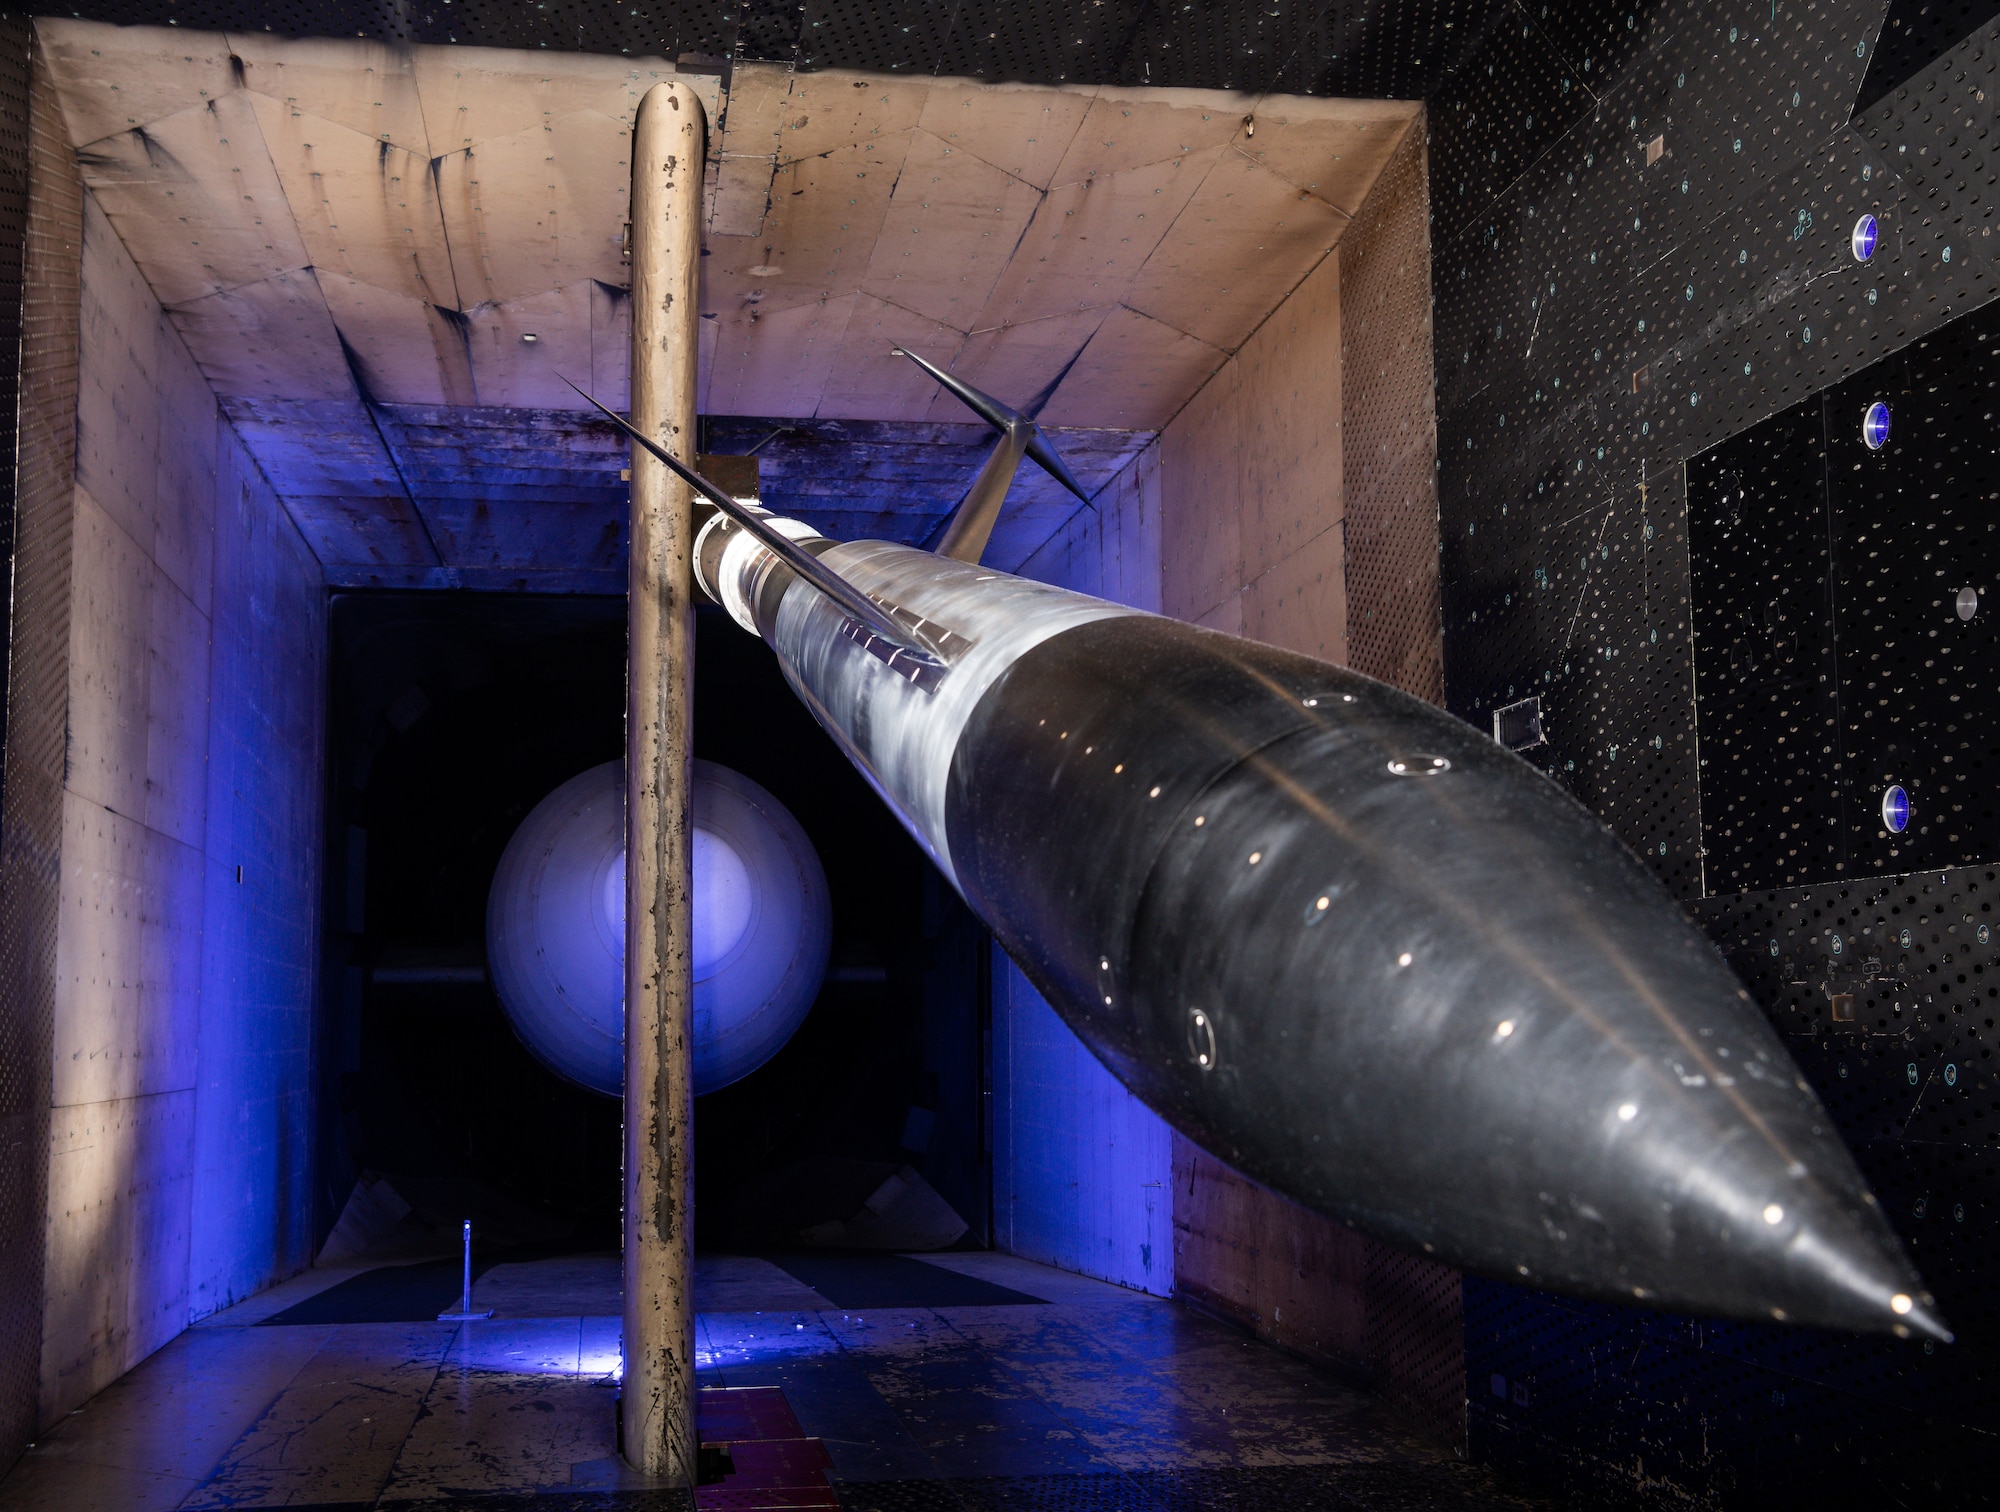 The AGARD-C model is installed in the 16-foot transonic wind tunnel at Arnold Air Force Base, Tenn.